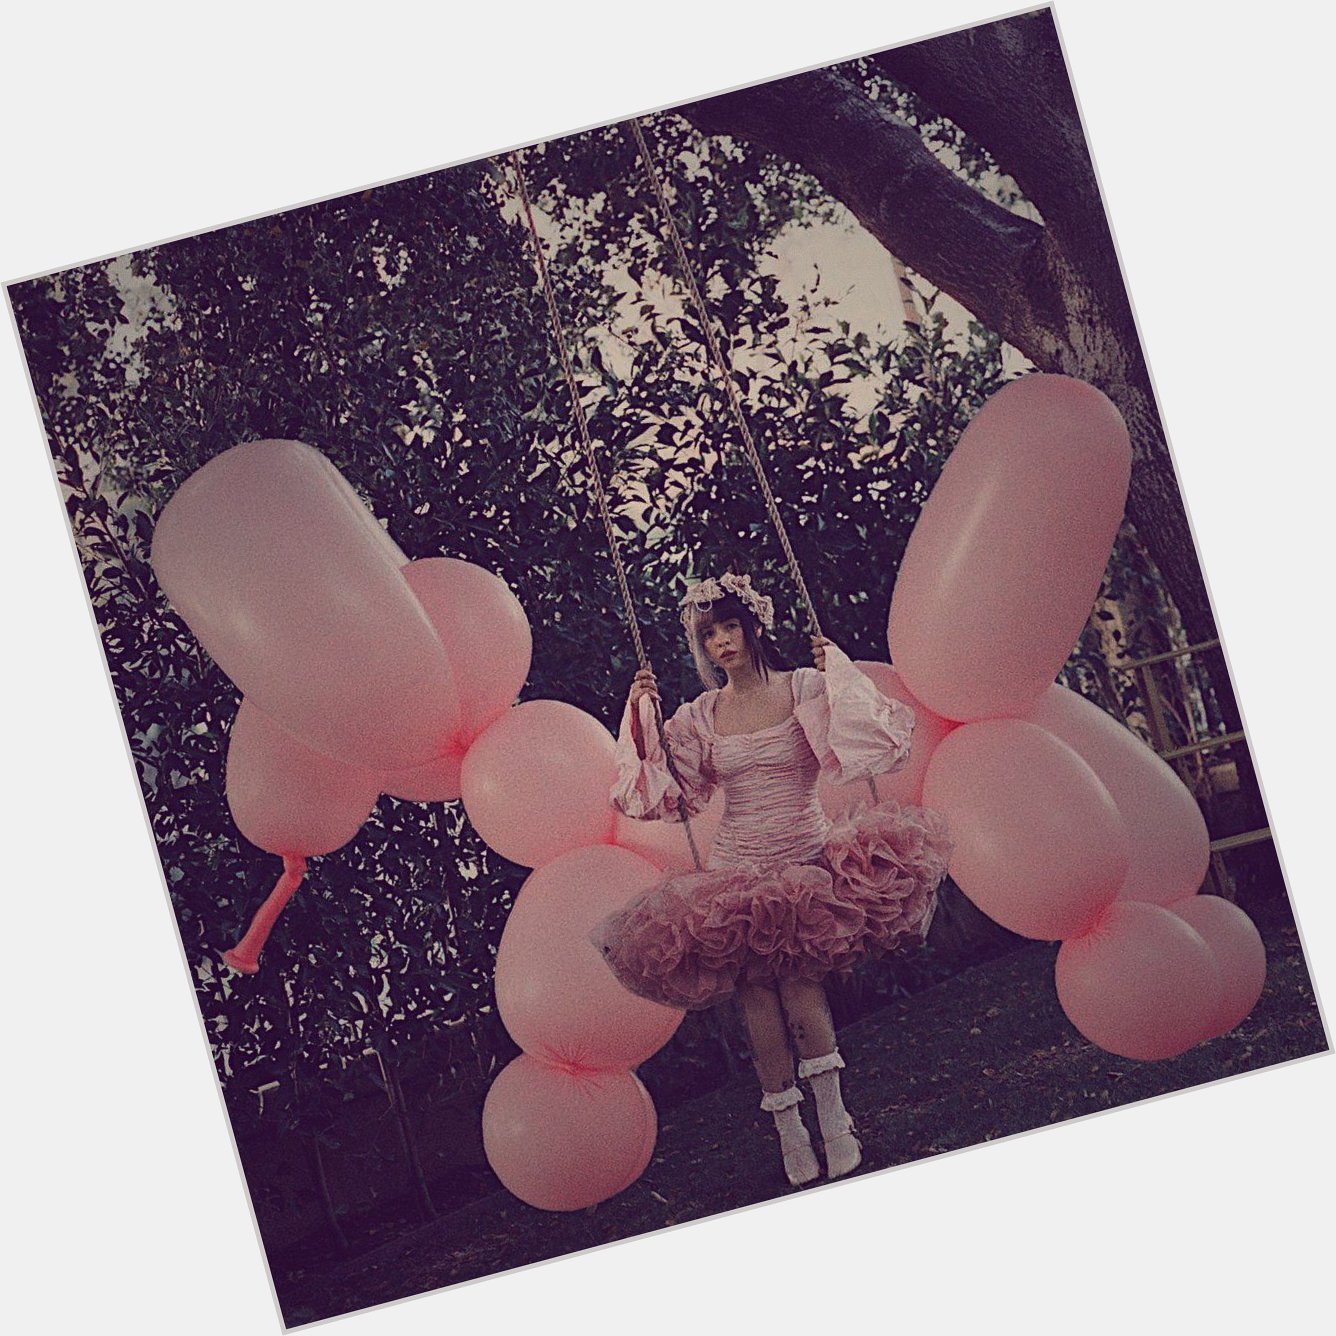 Happy birthday my princess Melanie Martinez we love u and will support you forever 